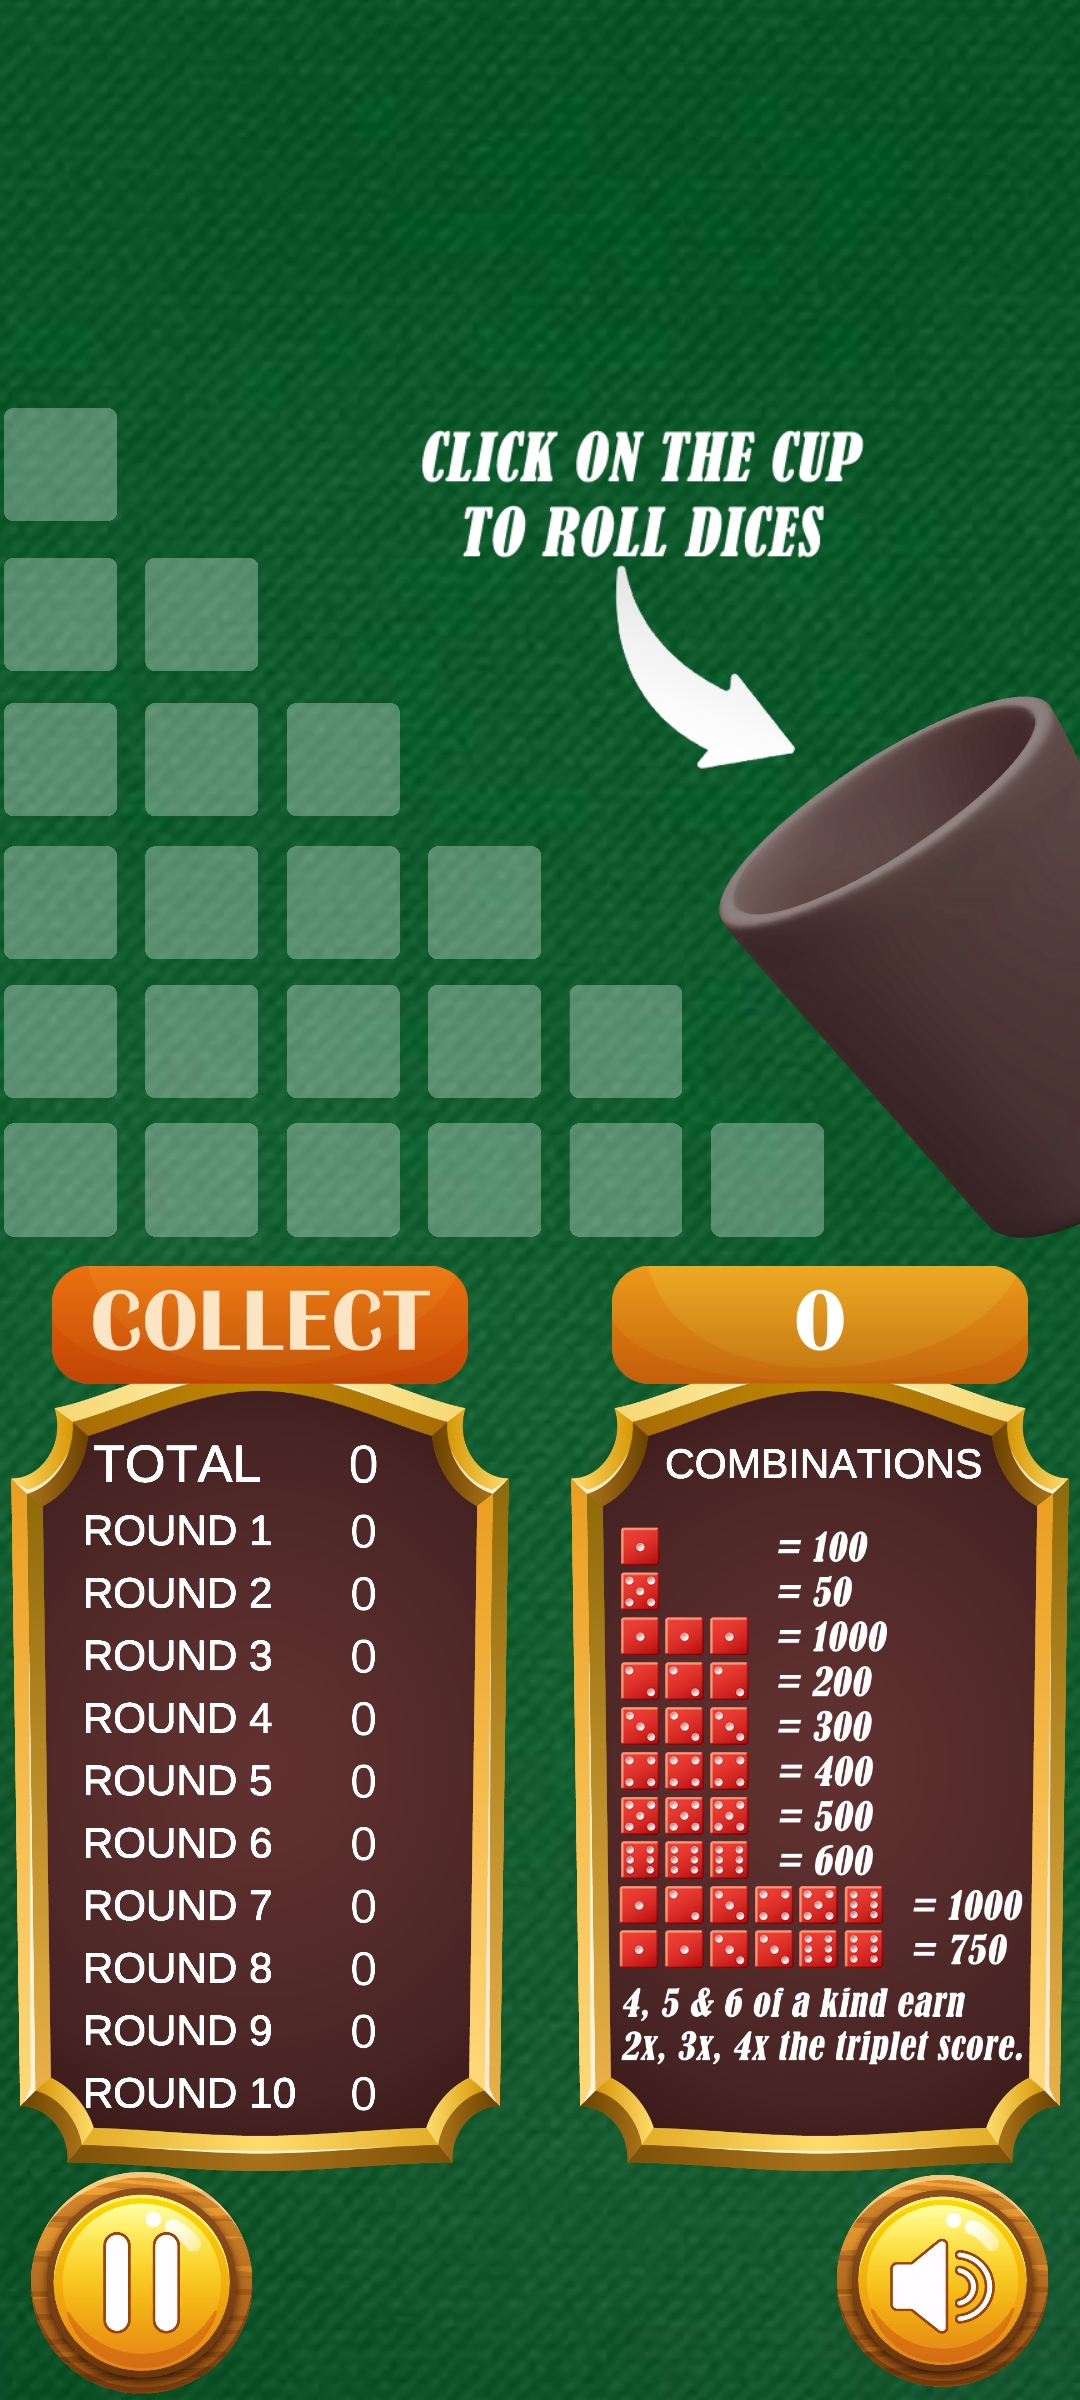 Play Farkle - Dice Game Online